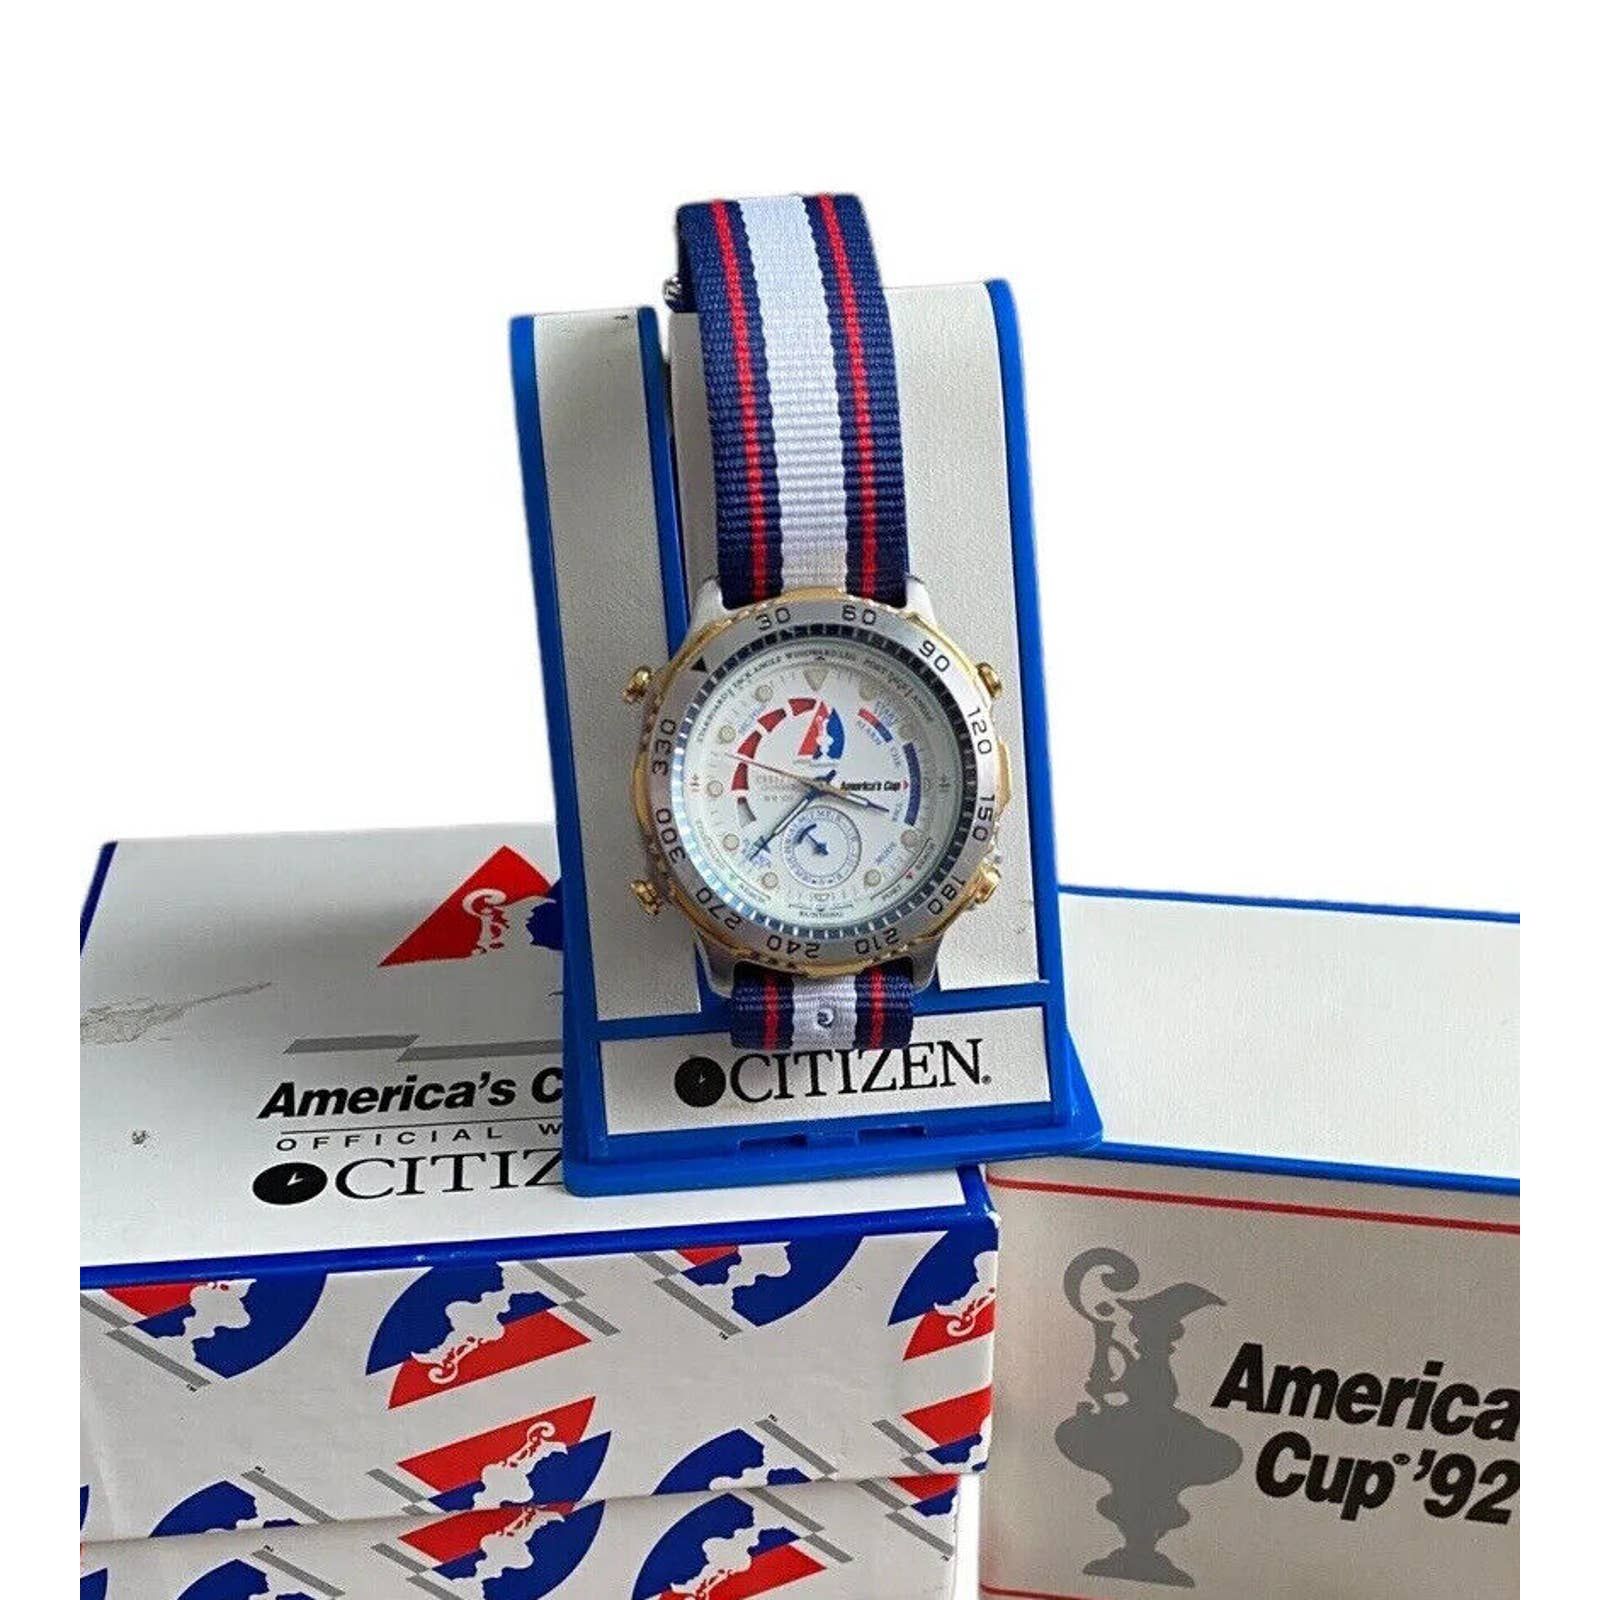 Citizen Citizen Yacht 1992 Americas Cup Watch Chronograph Race Size ONE SIZE - 1 Preview